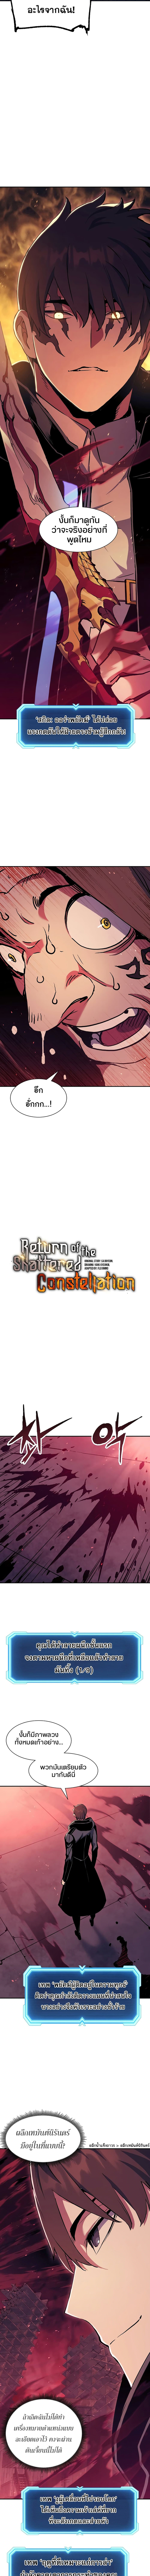 return of the shattered constellation 67.04